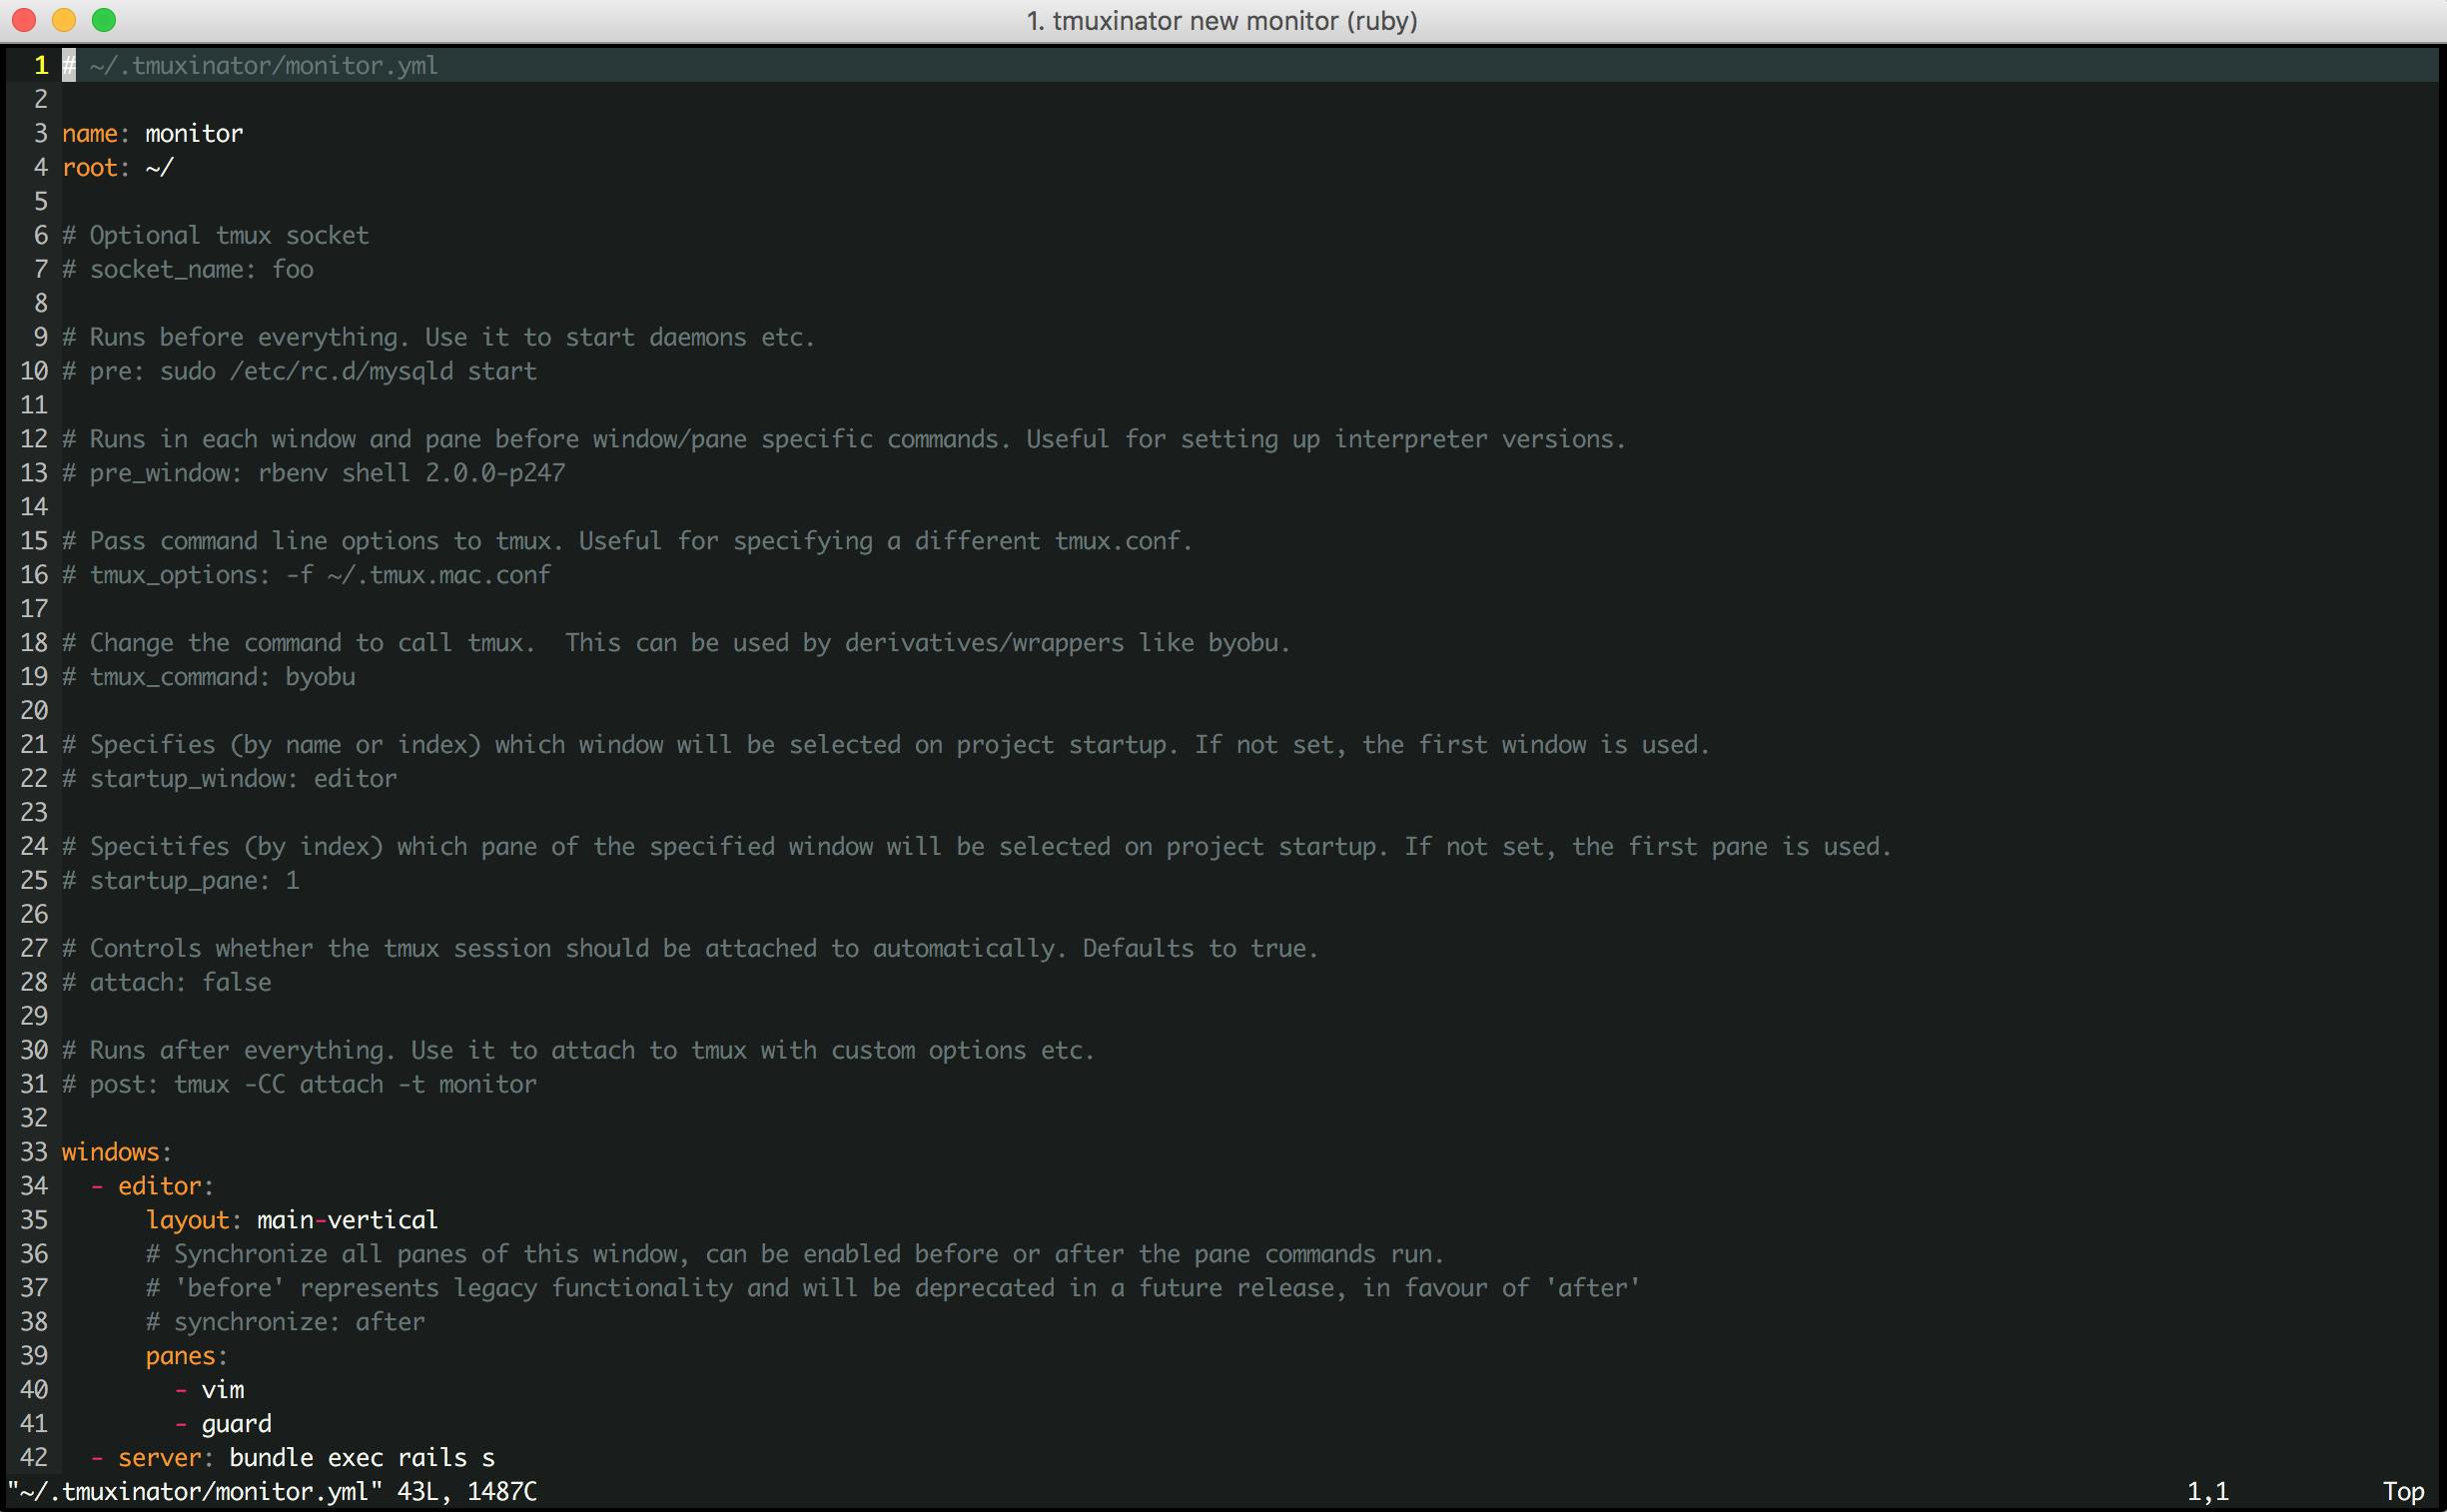 collective idea - tmux_new_monitor.png